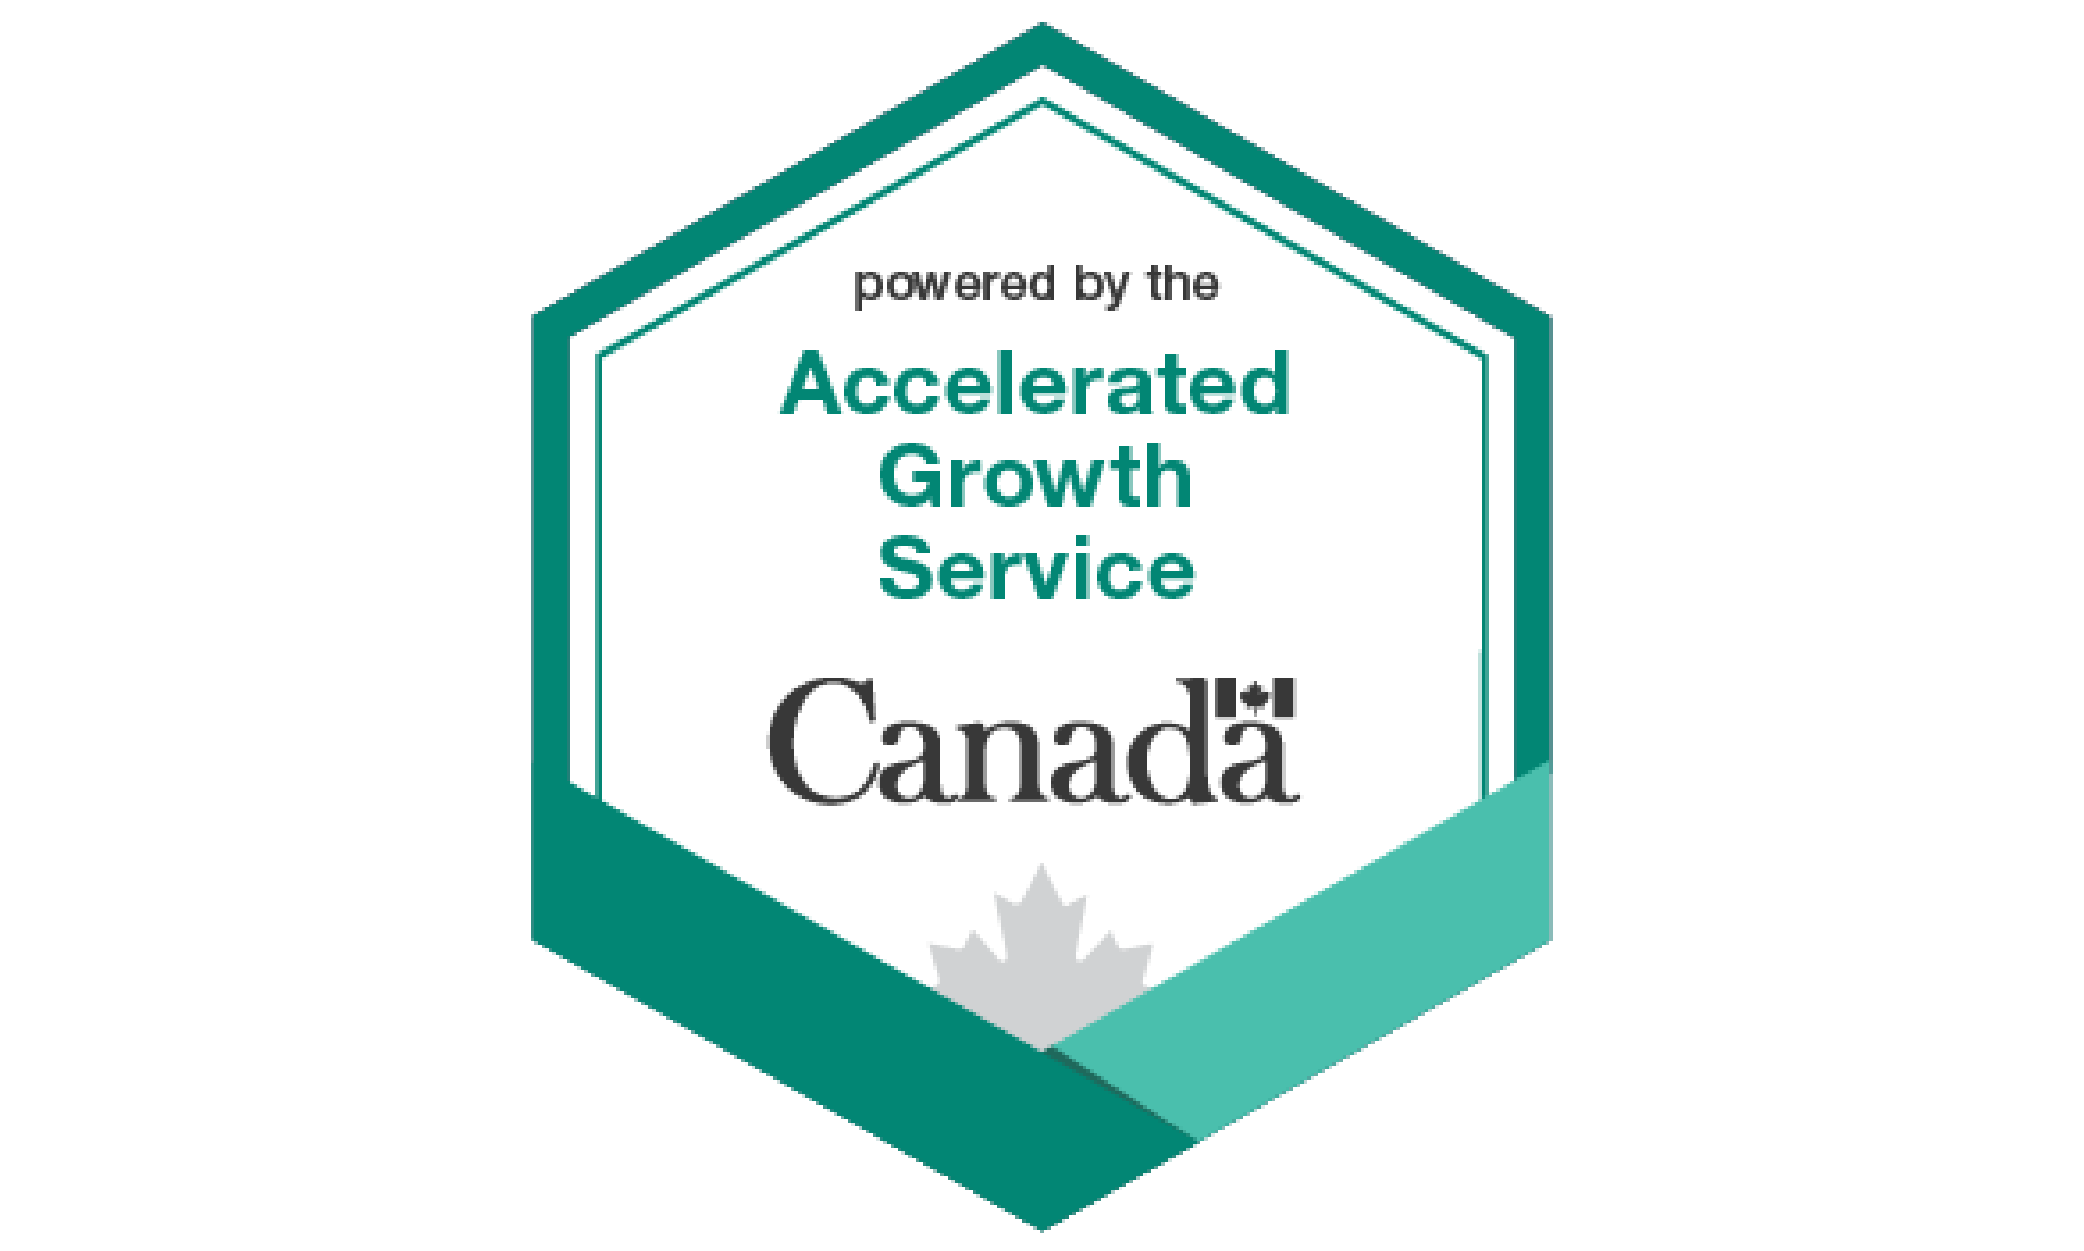 Accelerated Growth Service Canada logo